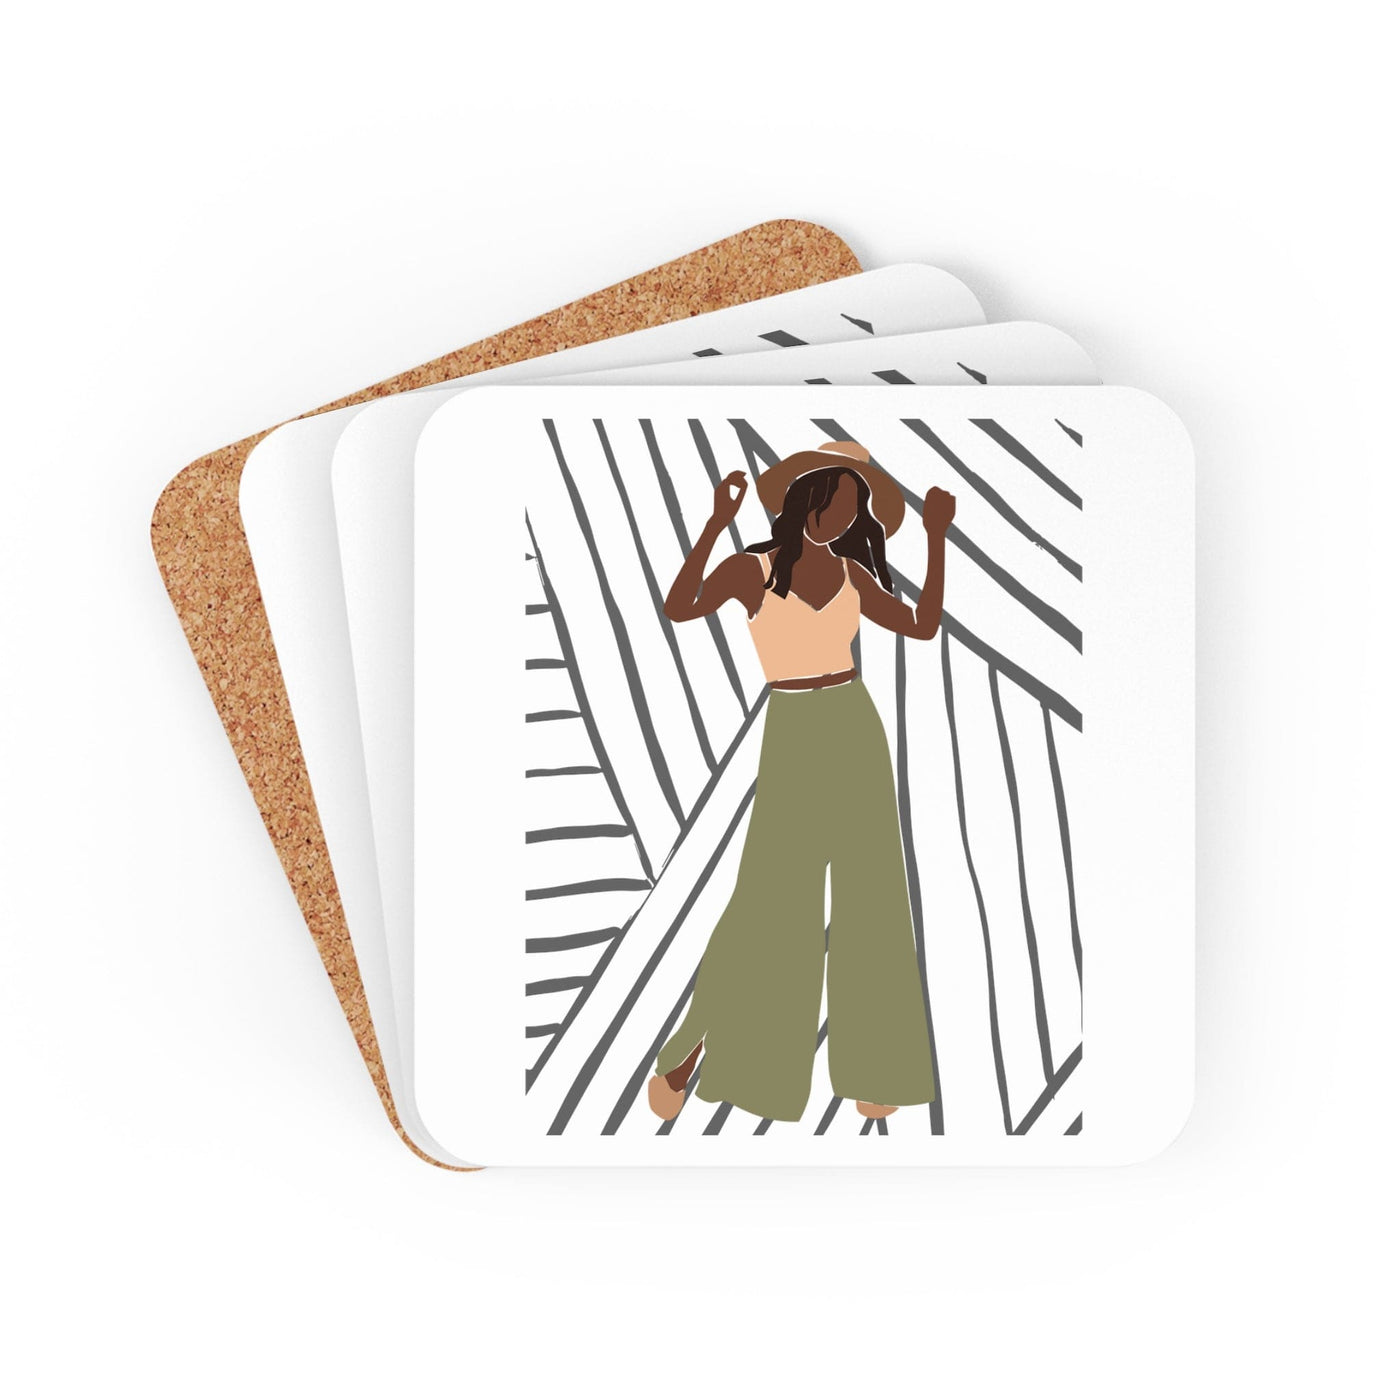 Coaster Set Of 4 For Drinks Say It Soul Its Her Groove Thing Positive